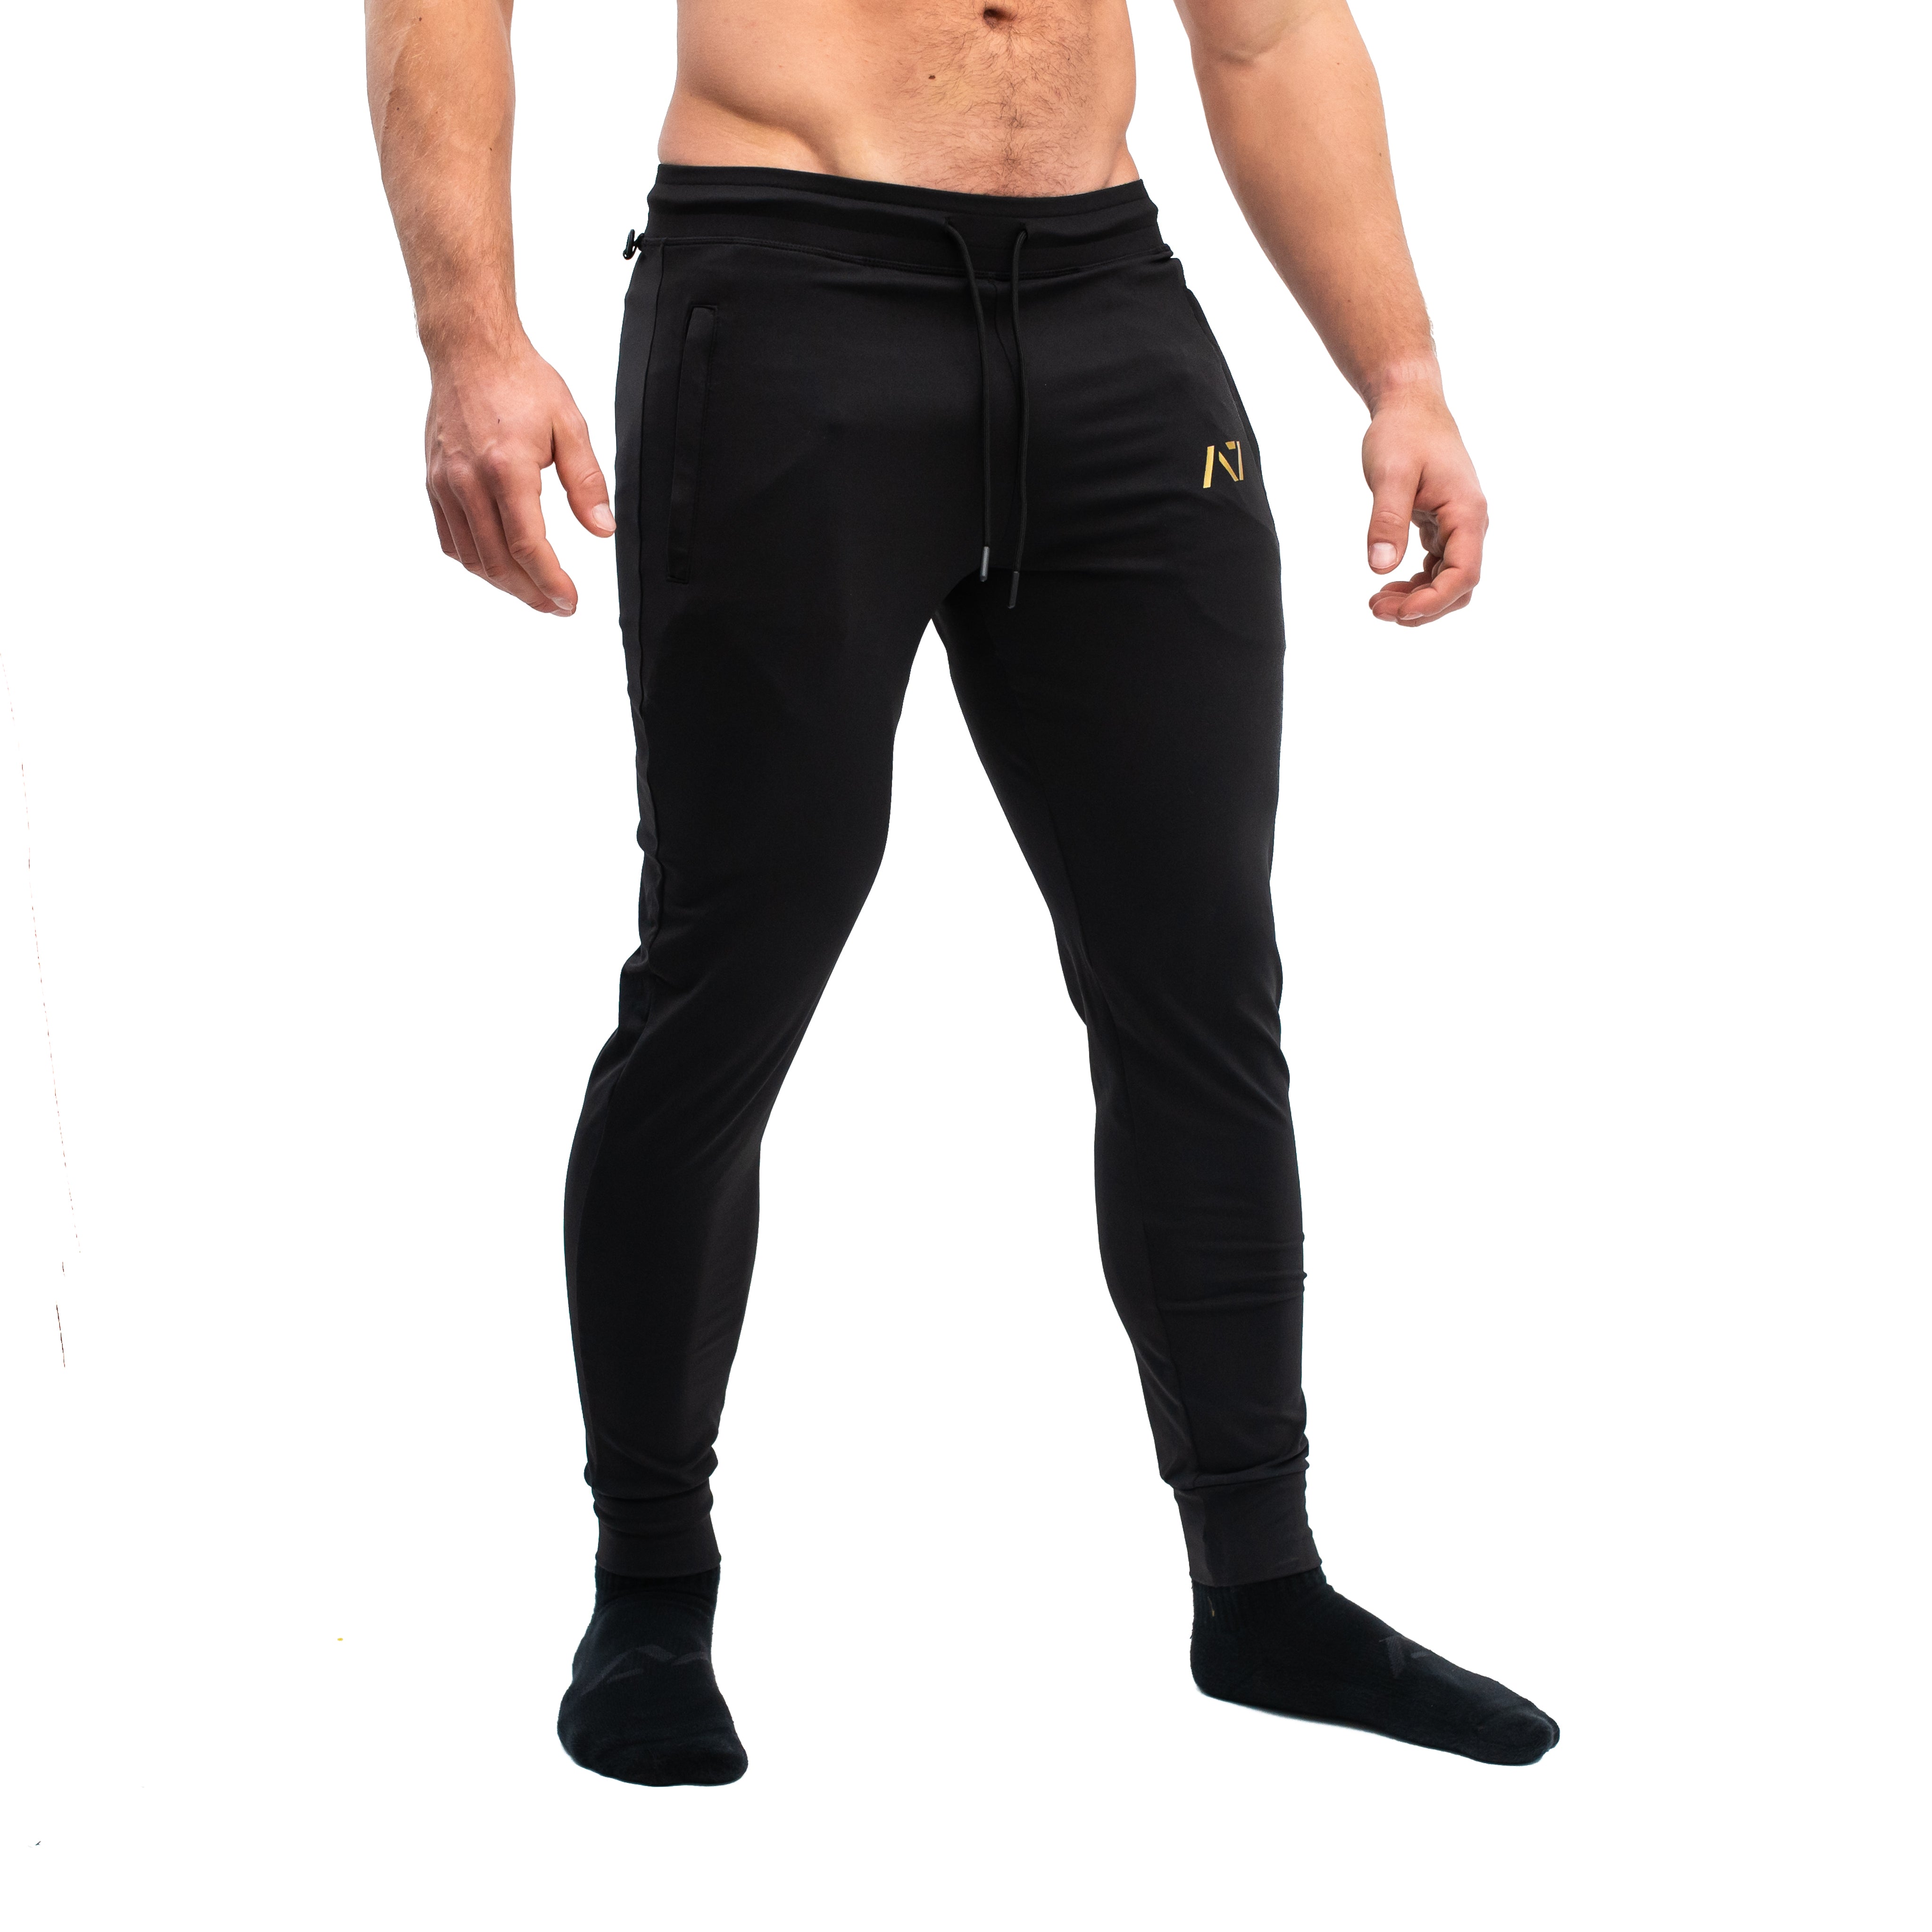 Gold Standard Defy joggers are just as comfortable in the gym as they are going out. These are made with premium moisture-wicking 4-way-stretch material for greater range of motion. These are a great fit for both men and women and offer deep zippered pockets and tapered leg design. Purchase Gold Standard Defy Joggers from A7 UK shipping to UK or A7 Europe shipping to EU.